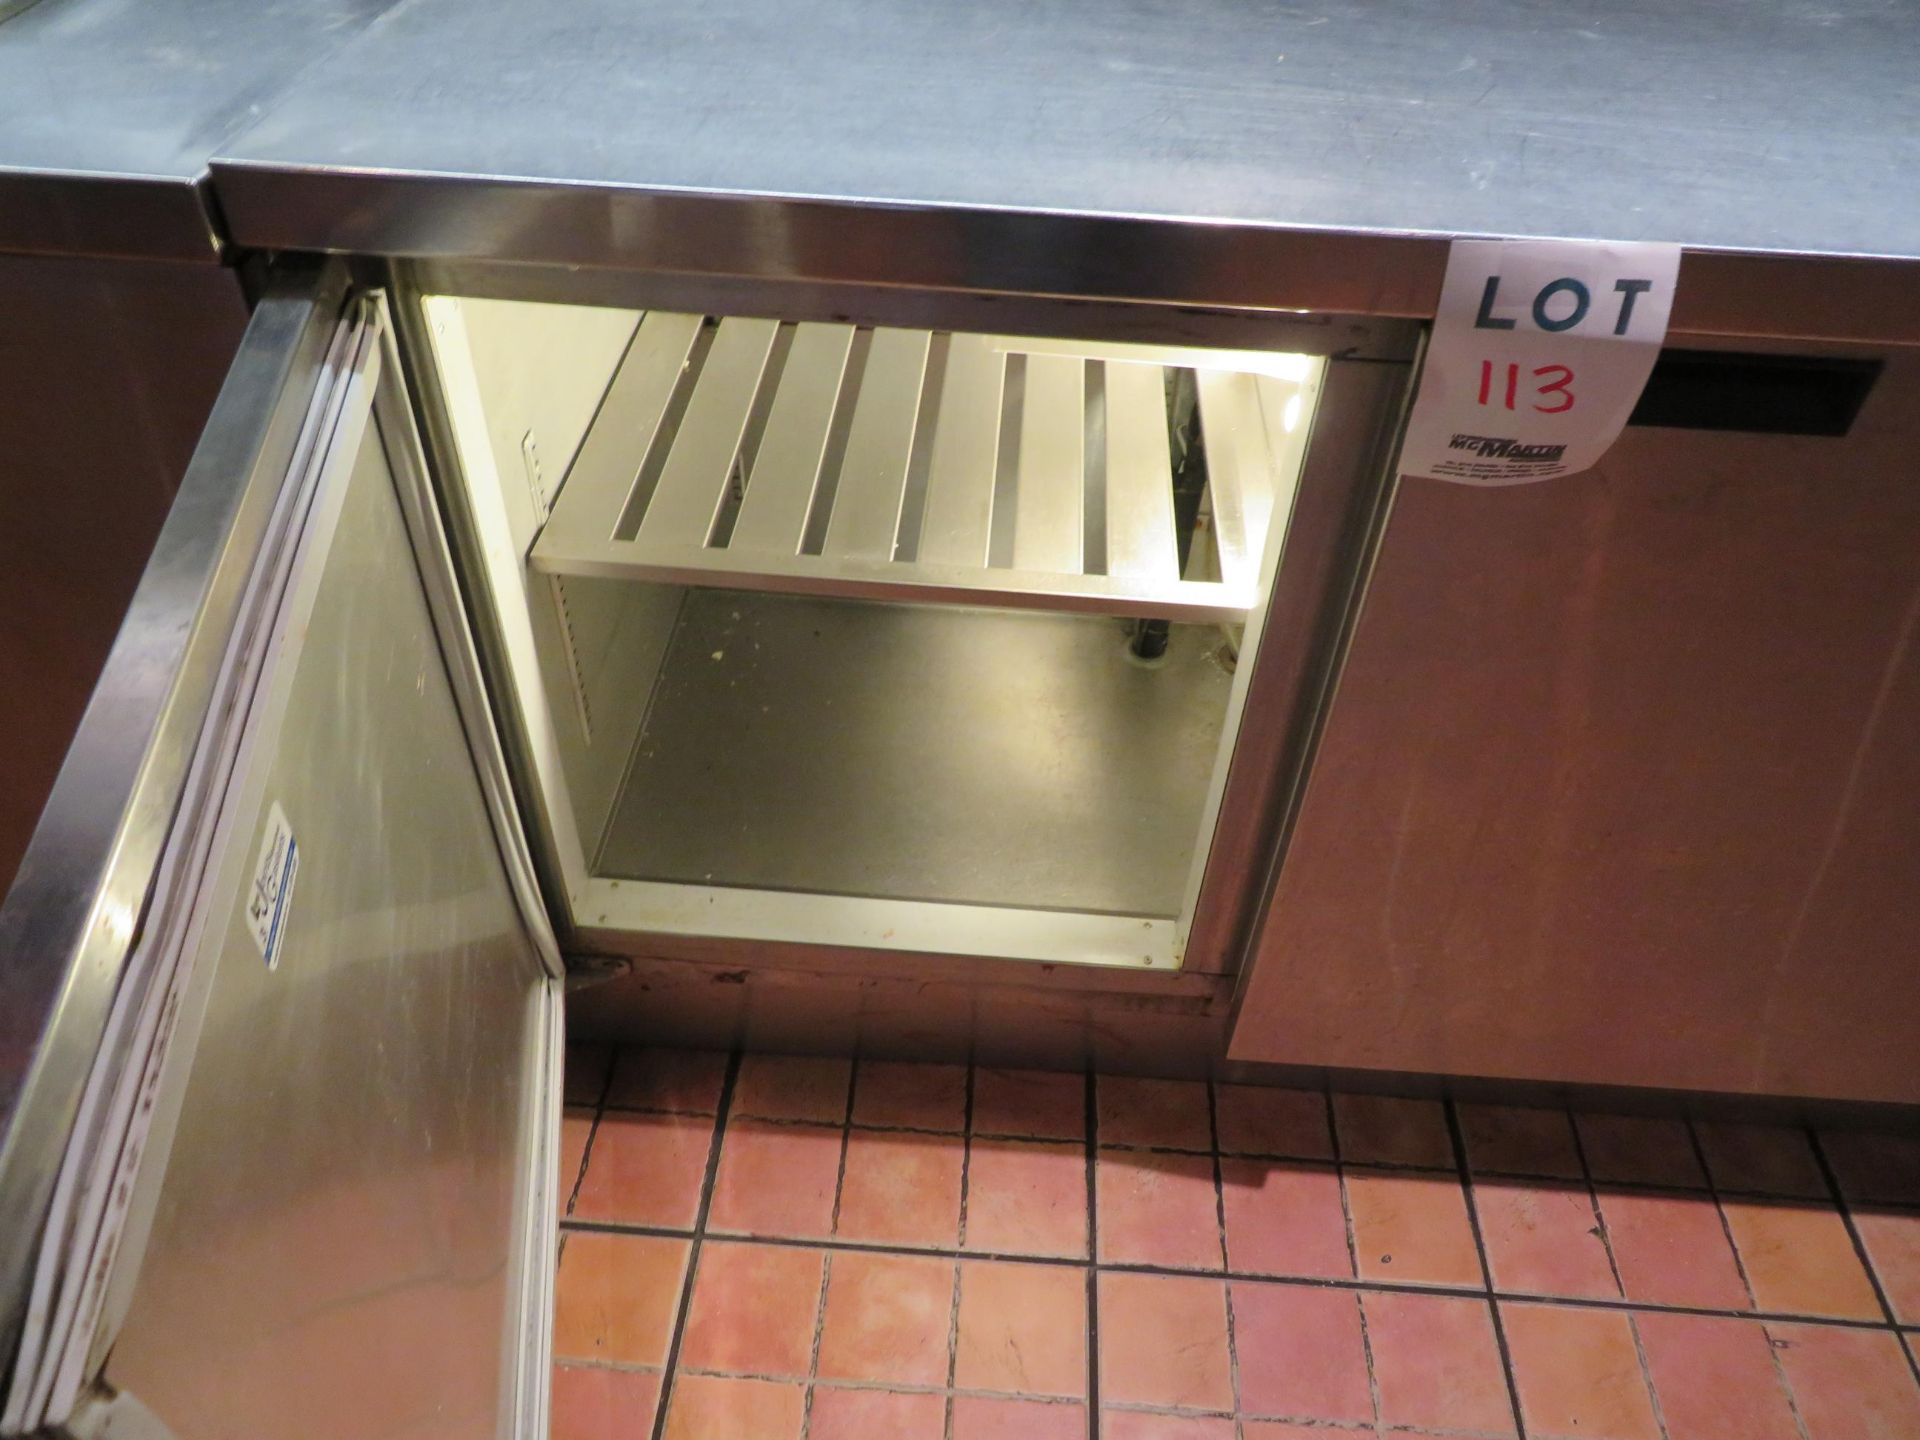 2 door refrigerated stainless steel counter approx. 48"w x 24"d x 35"h - Image 2 of 2